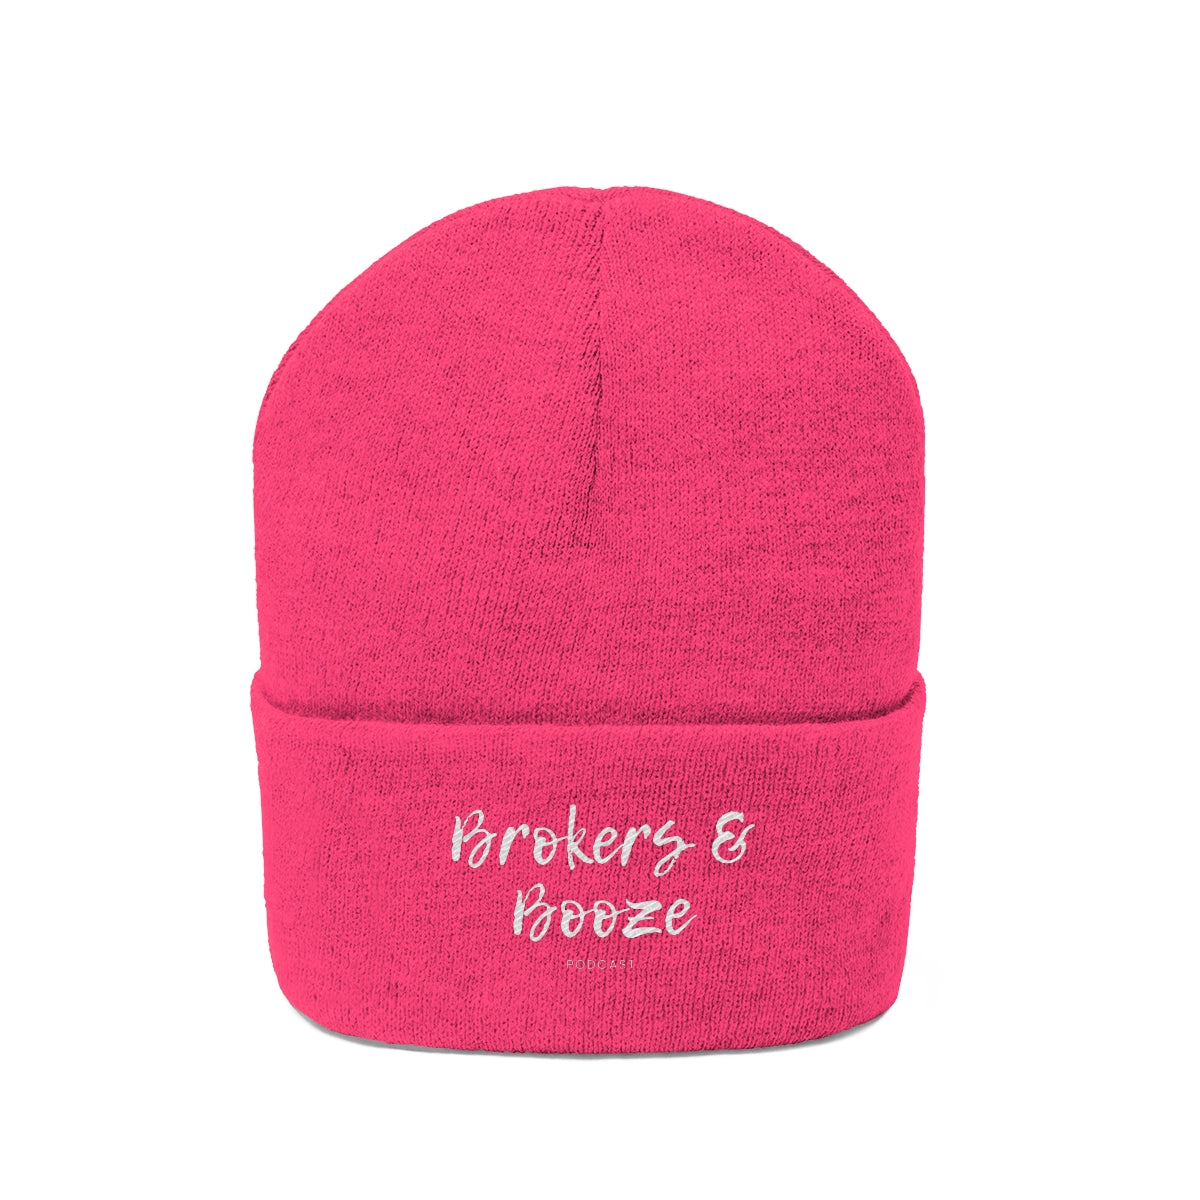 Brokers and Booze Podcast Knit Beanie